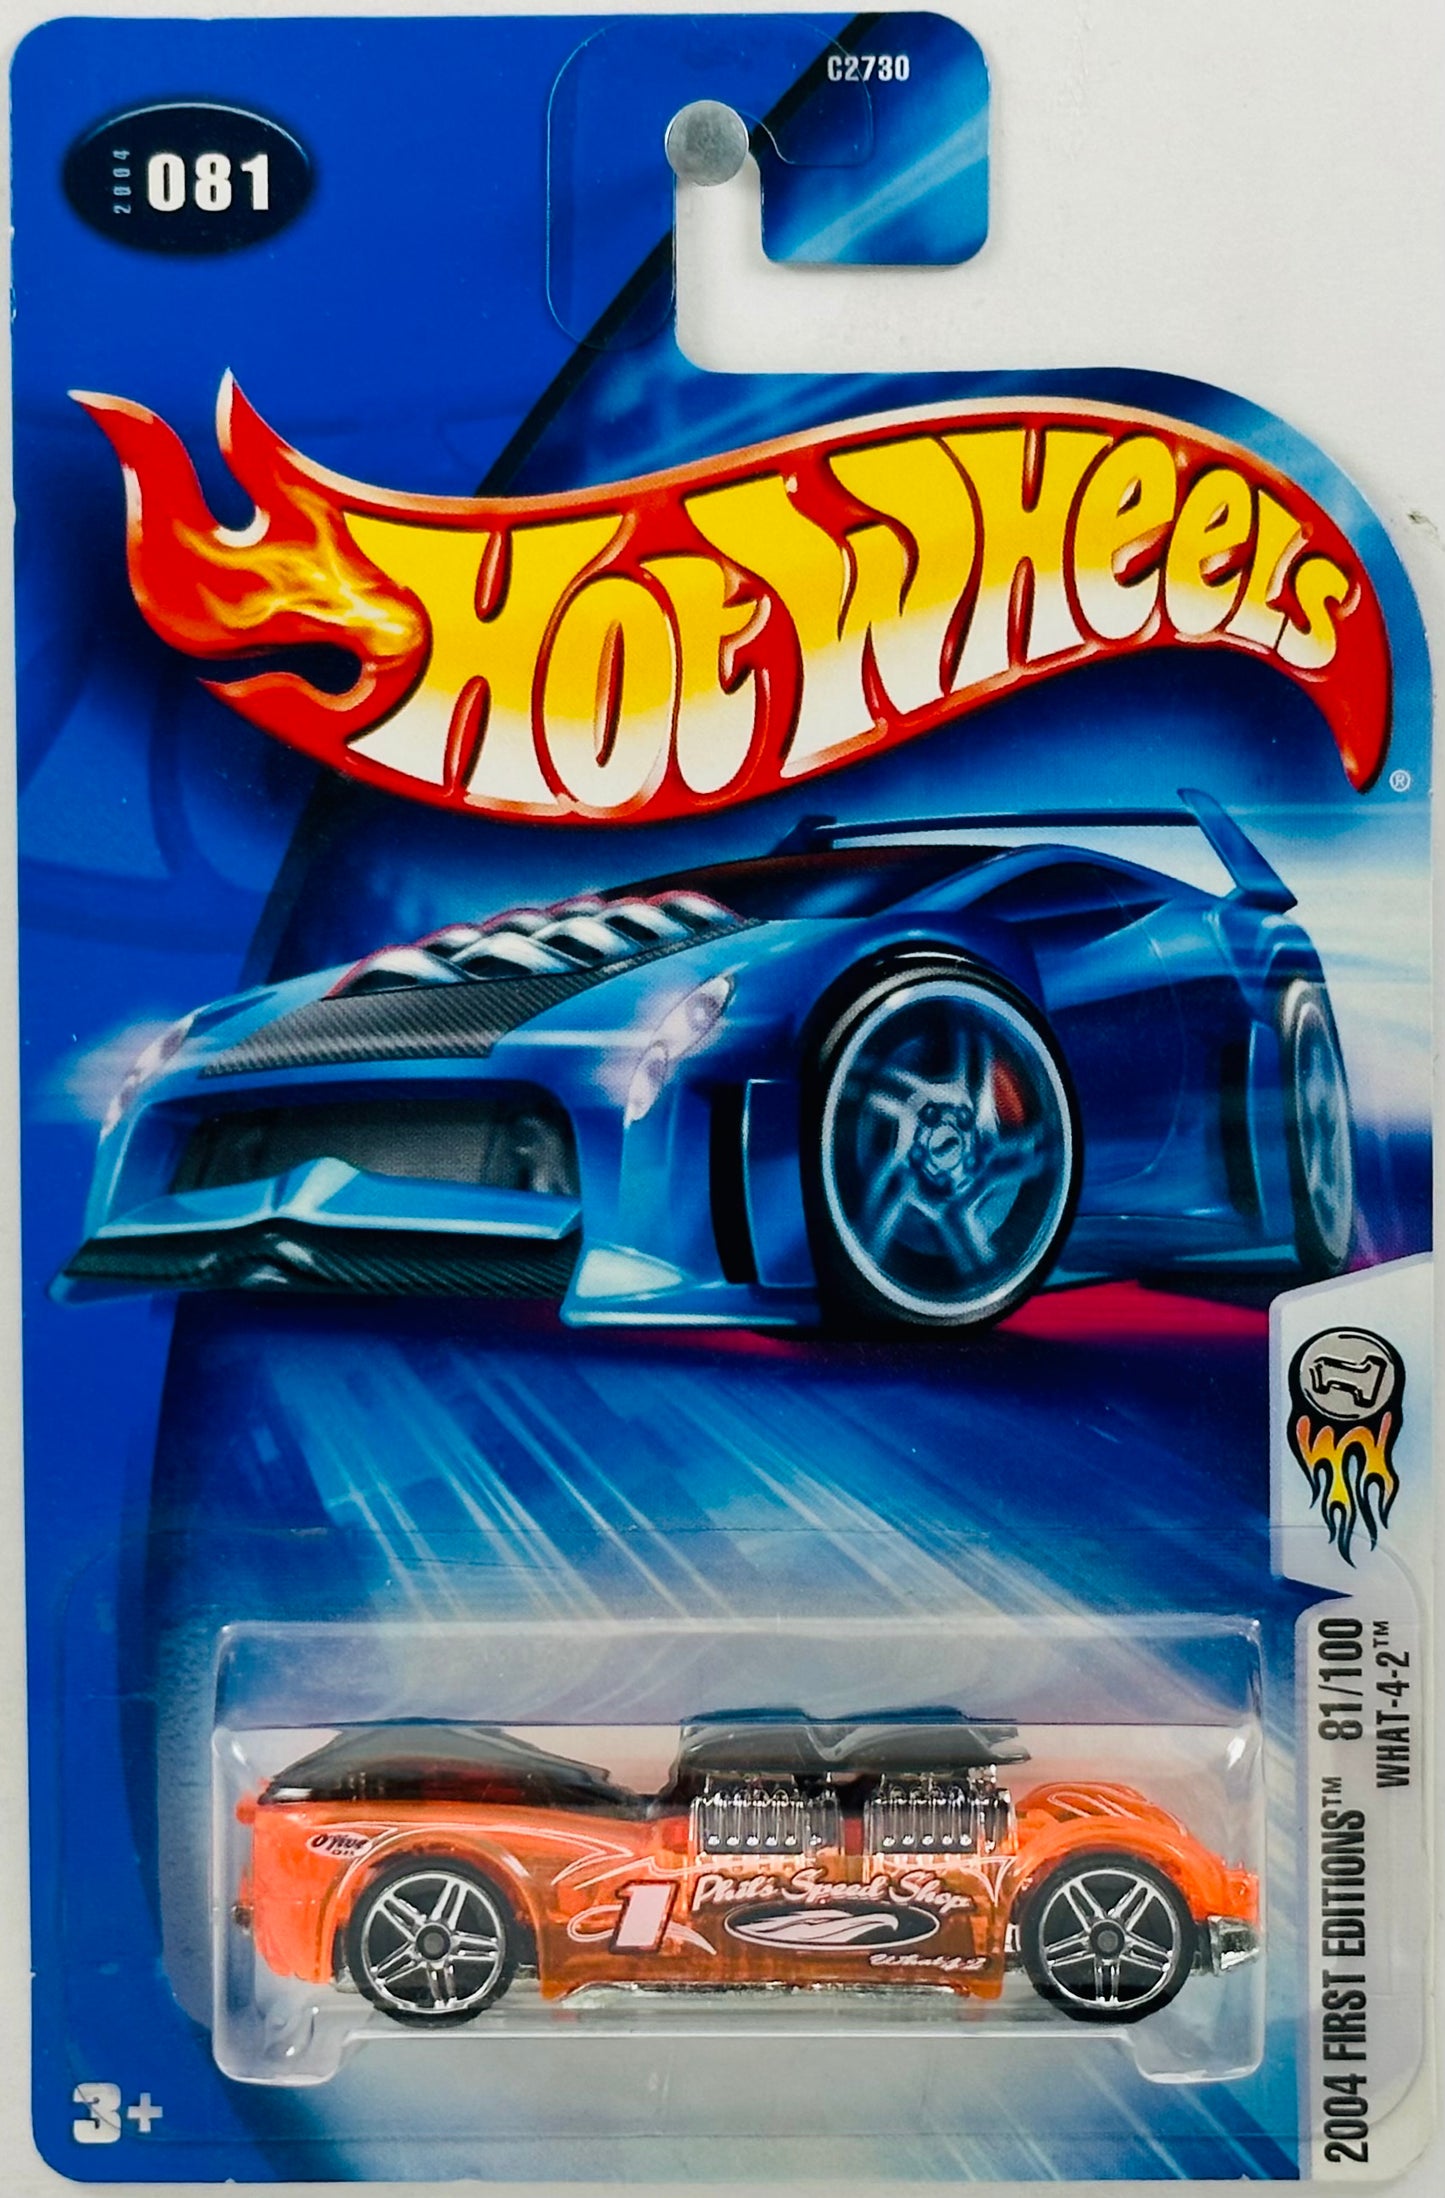 Hot Wheels 2004 - Collector # 081/212 - First Editions 81/100 - What-4-2 - Transparent Orange - Smoked Windows - '04 NC